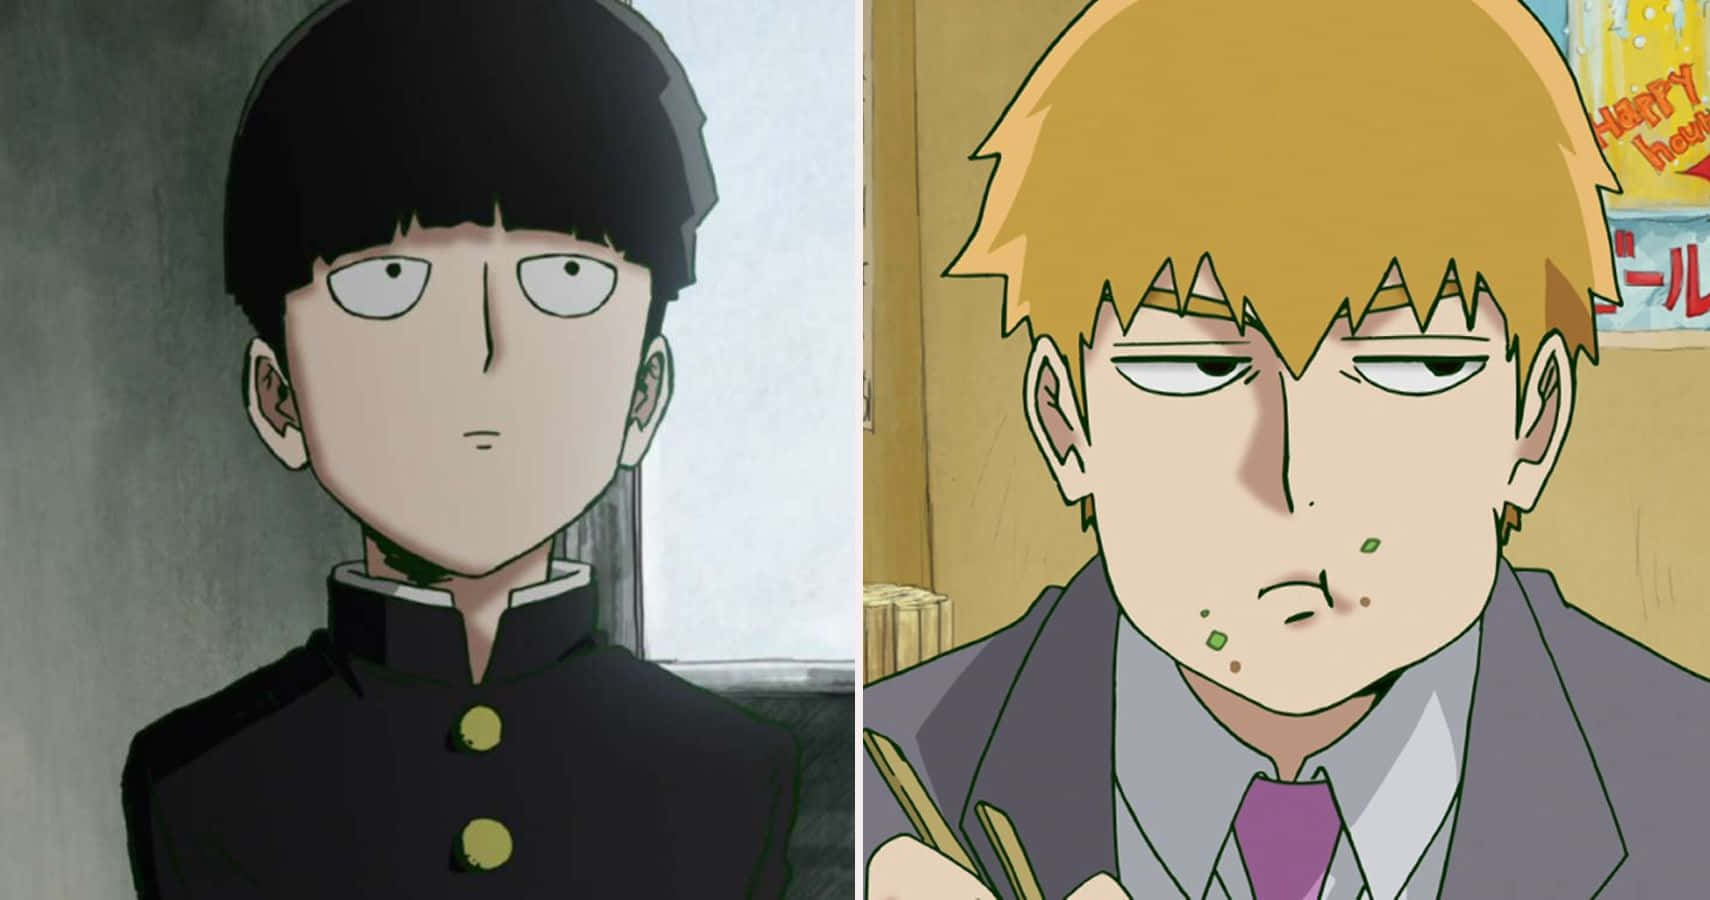 Get ready to take your mind to a new supernatural level with Mob Psycho